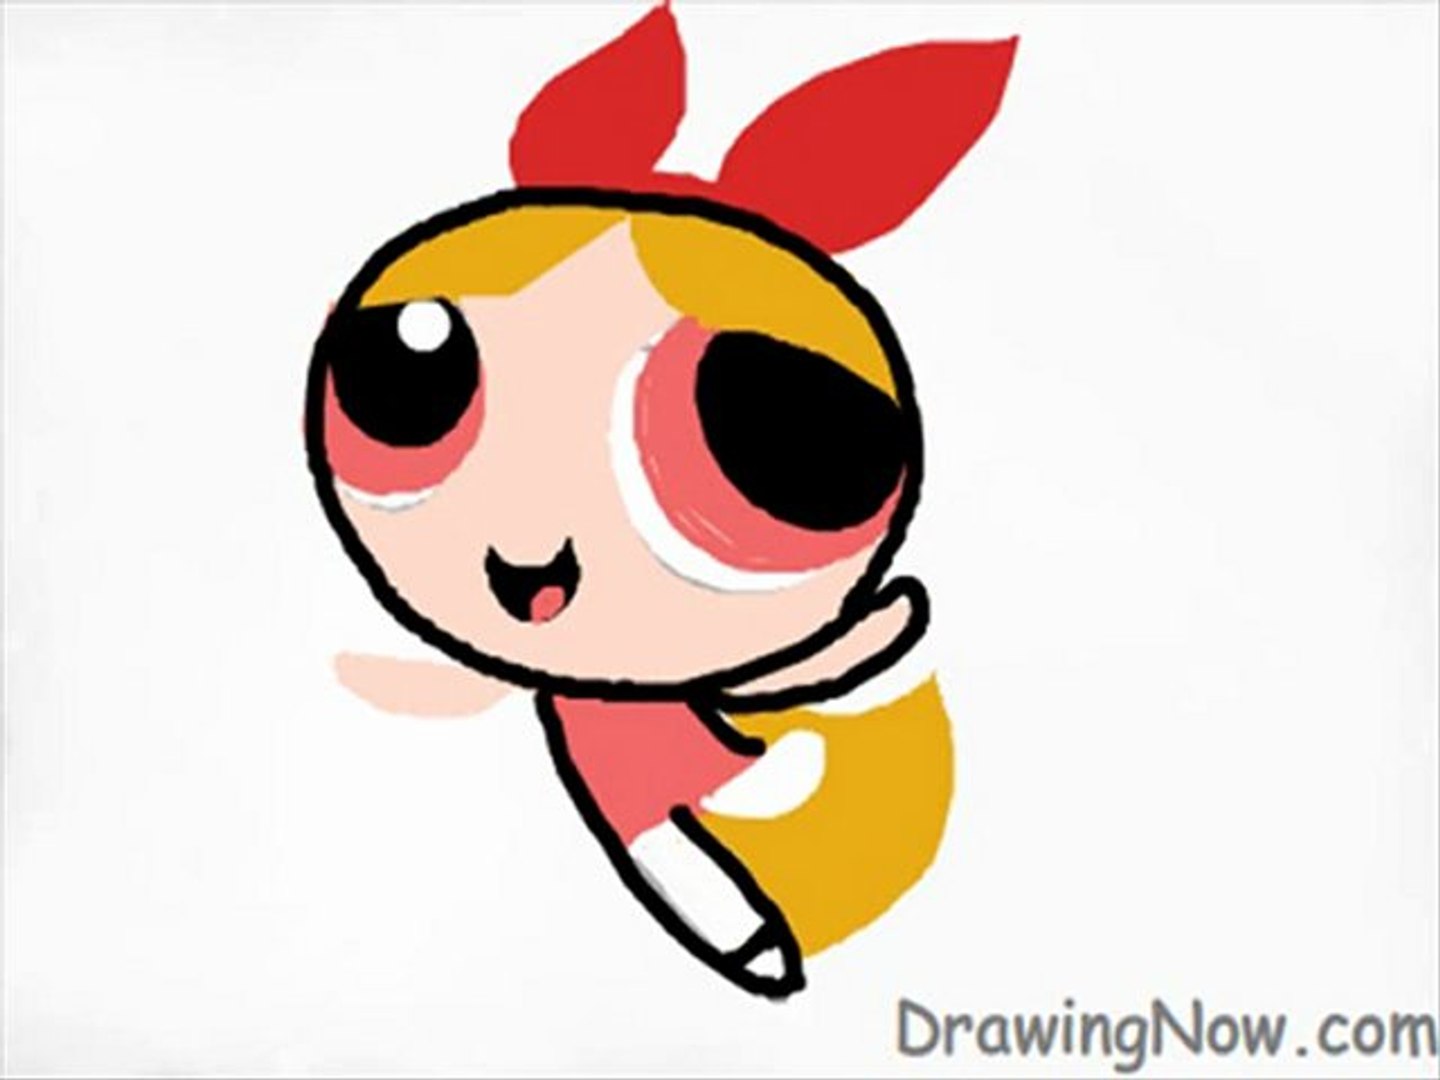 How To Draw Buttercup From The Powerpuff Girls - video Dailymotion